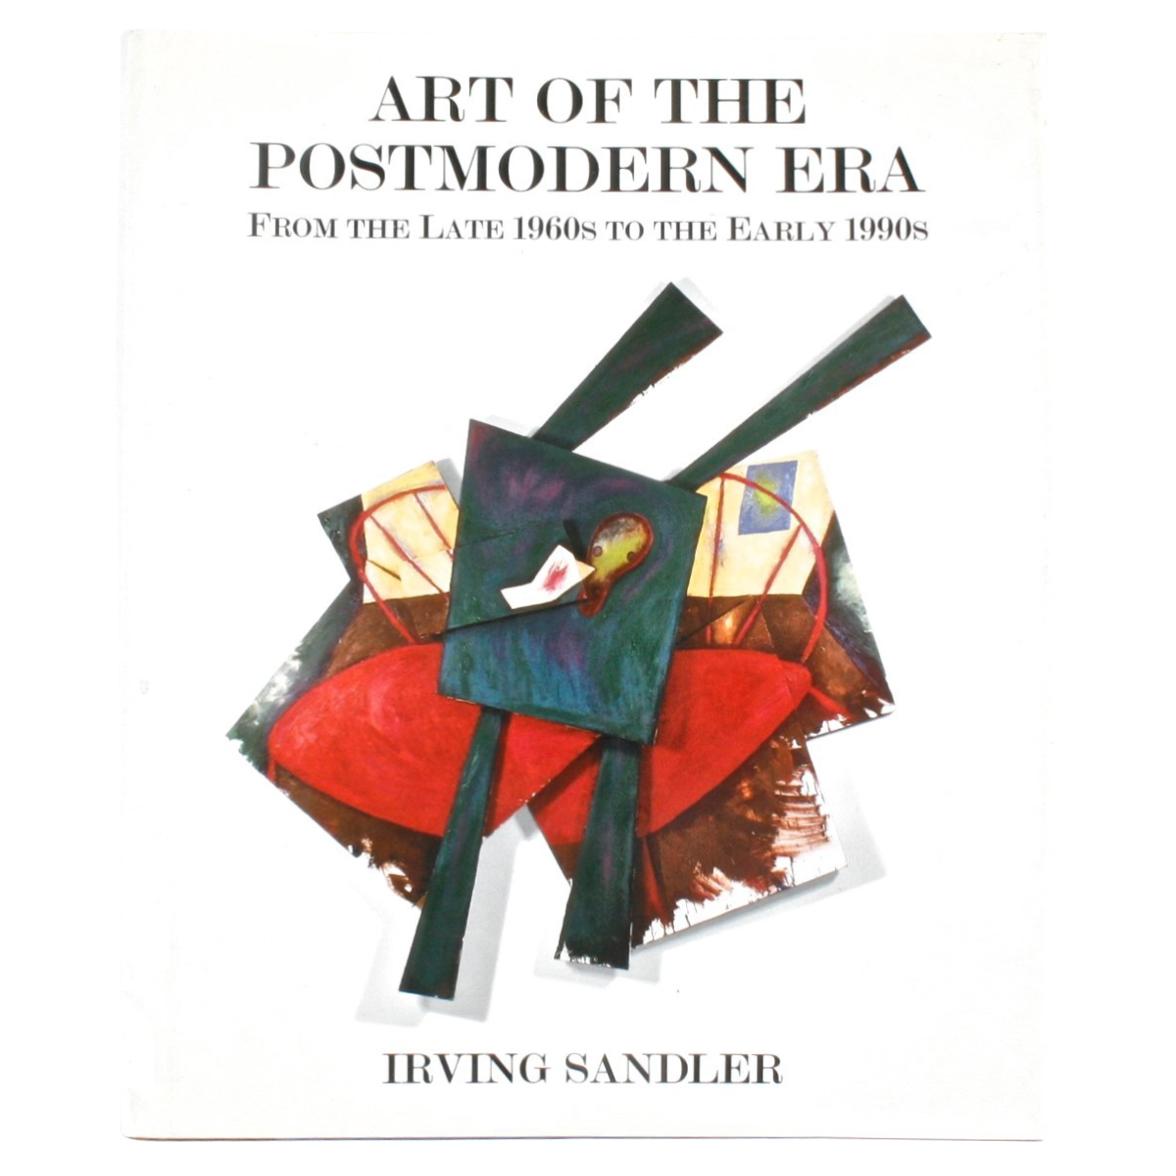 Art of the Postmodern Era From The Late 1960s to the Early 1990s, First Edition